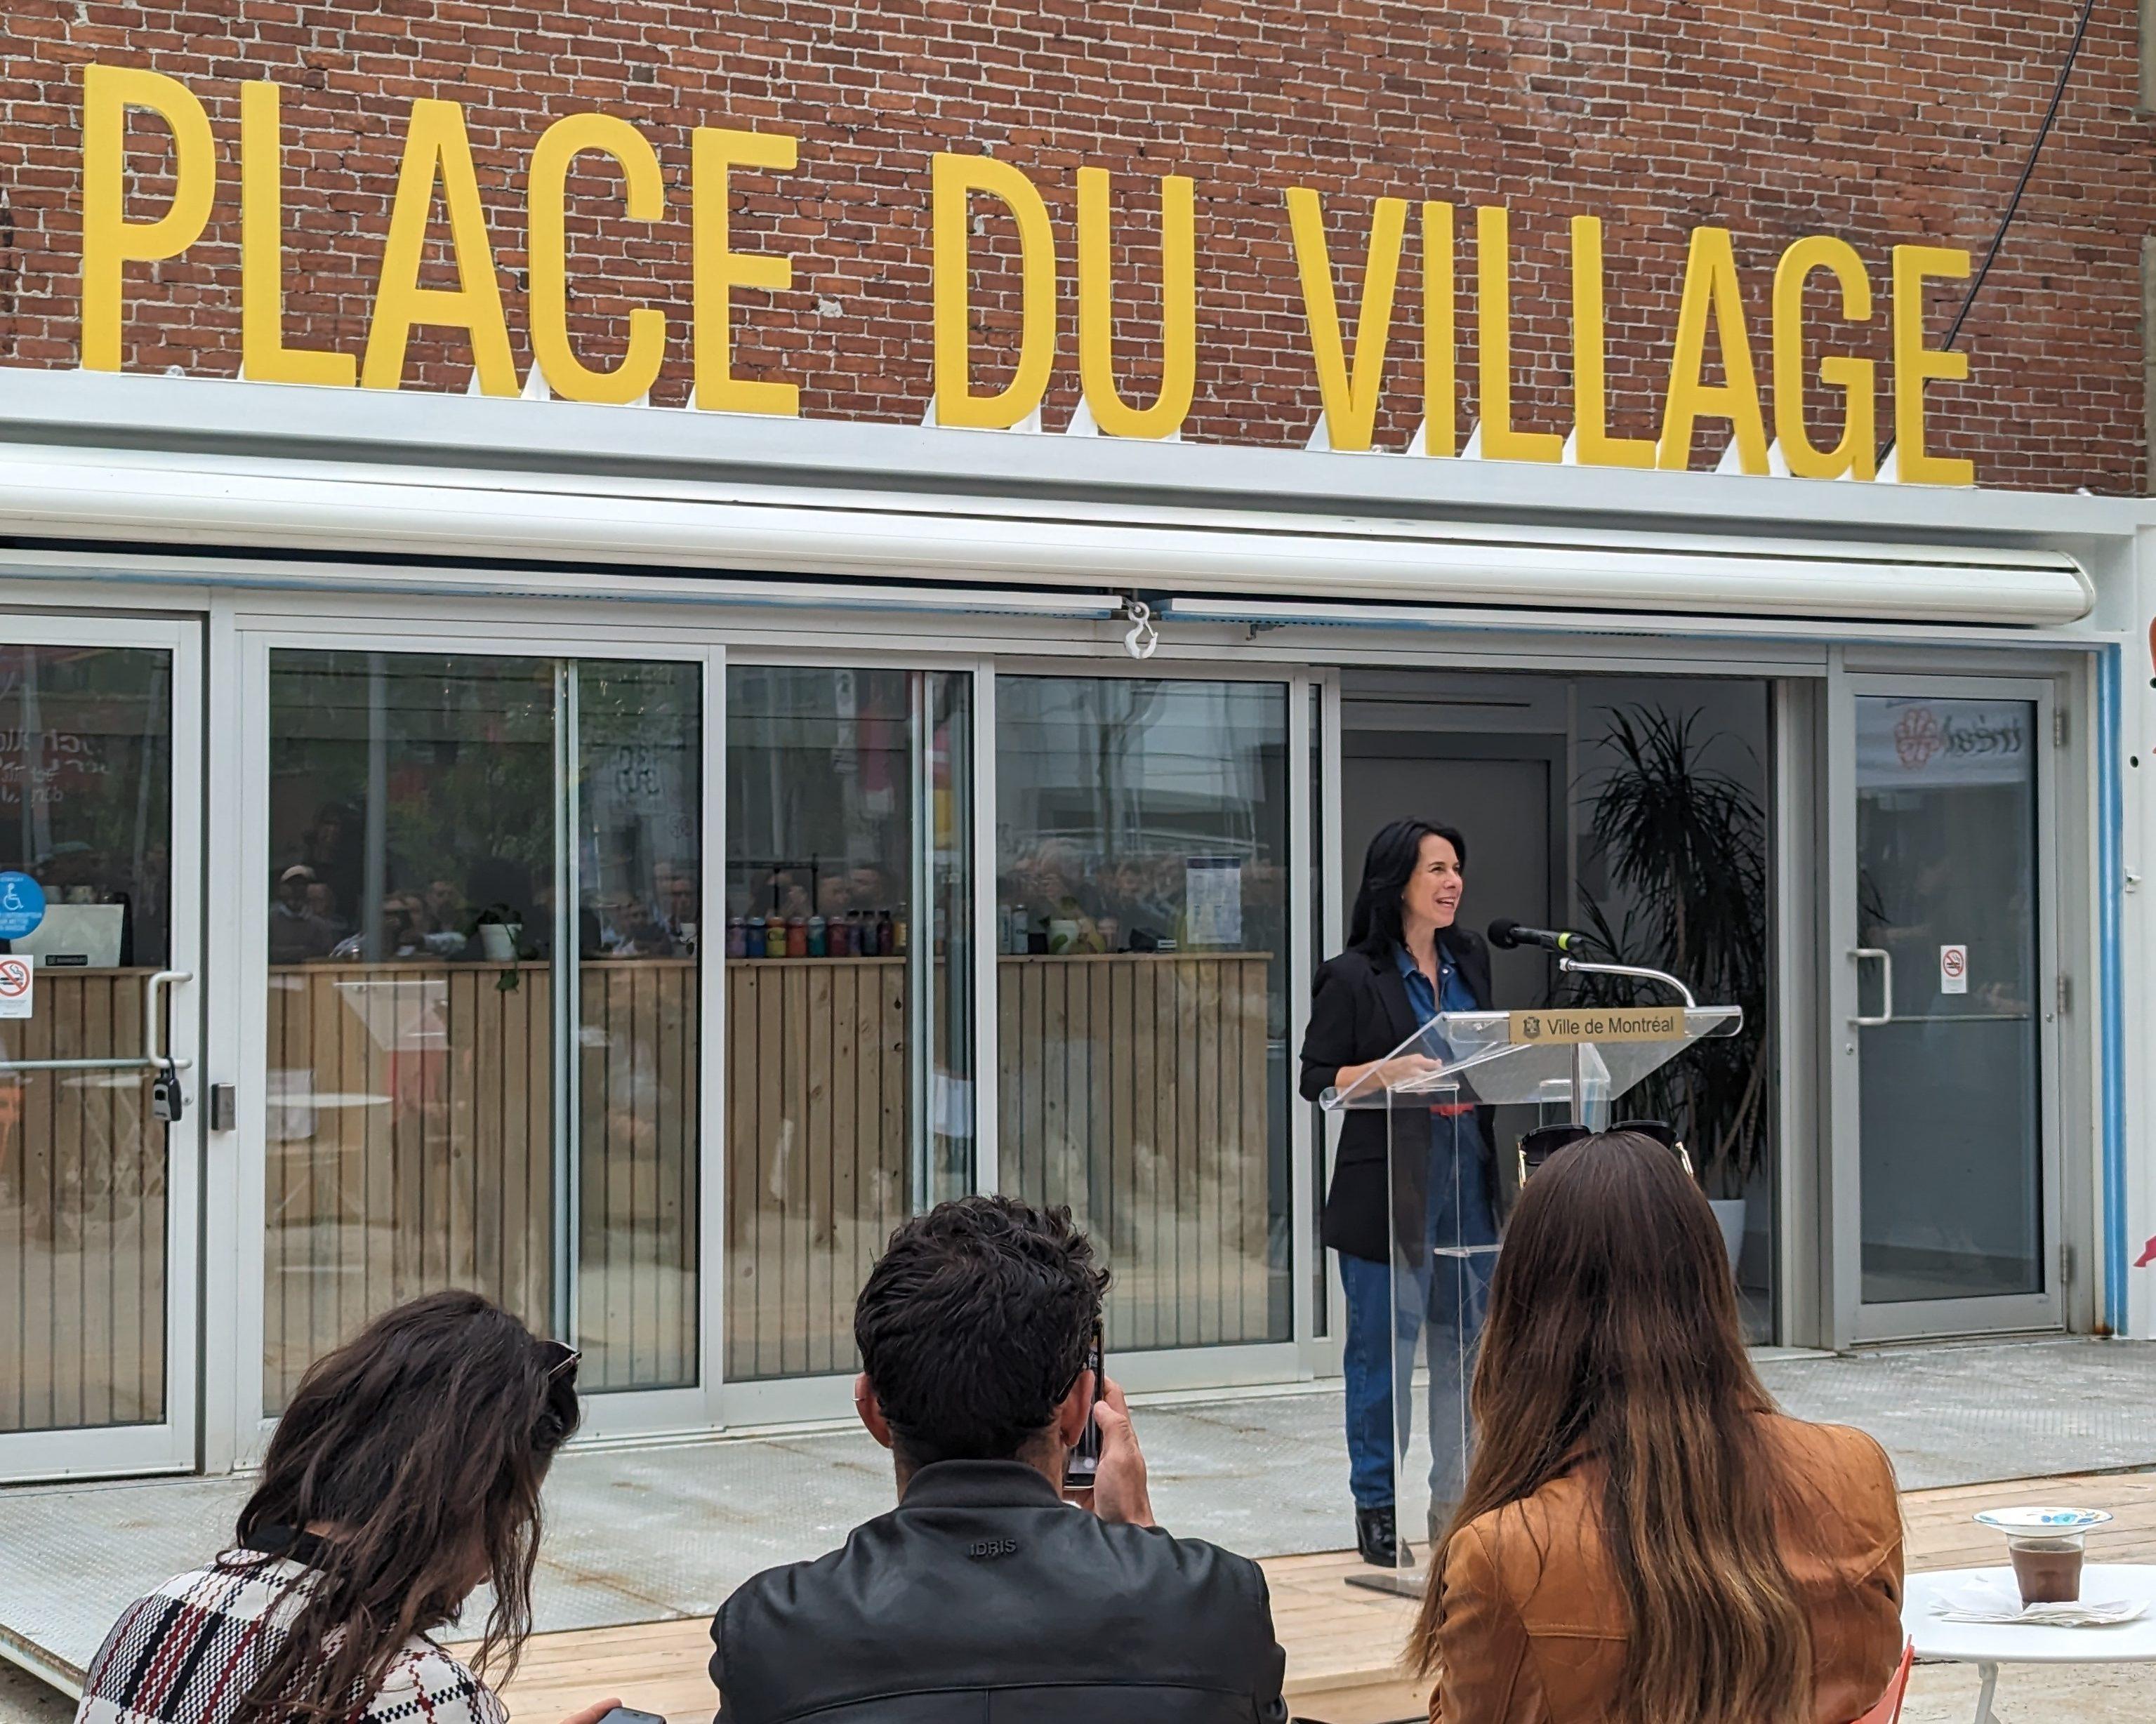 Over $2 million invested in the social and economic vitality of the Village